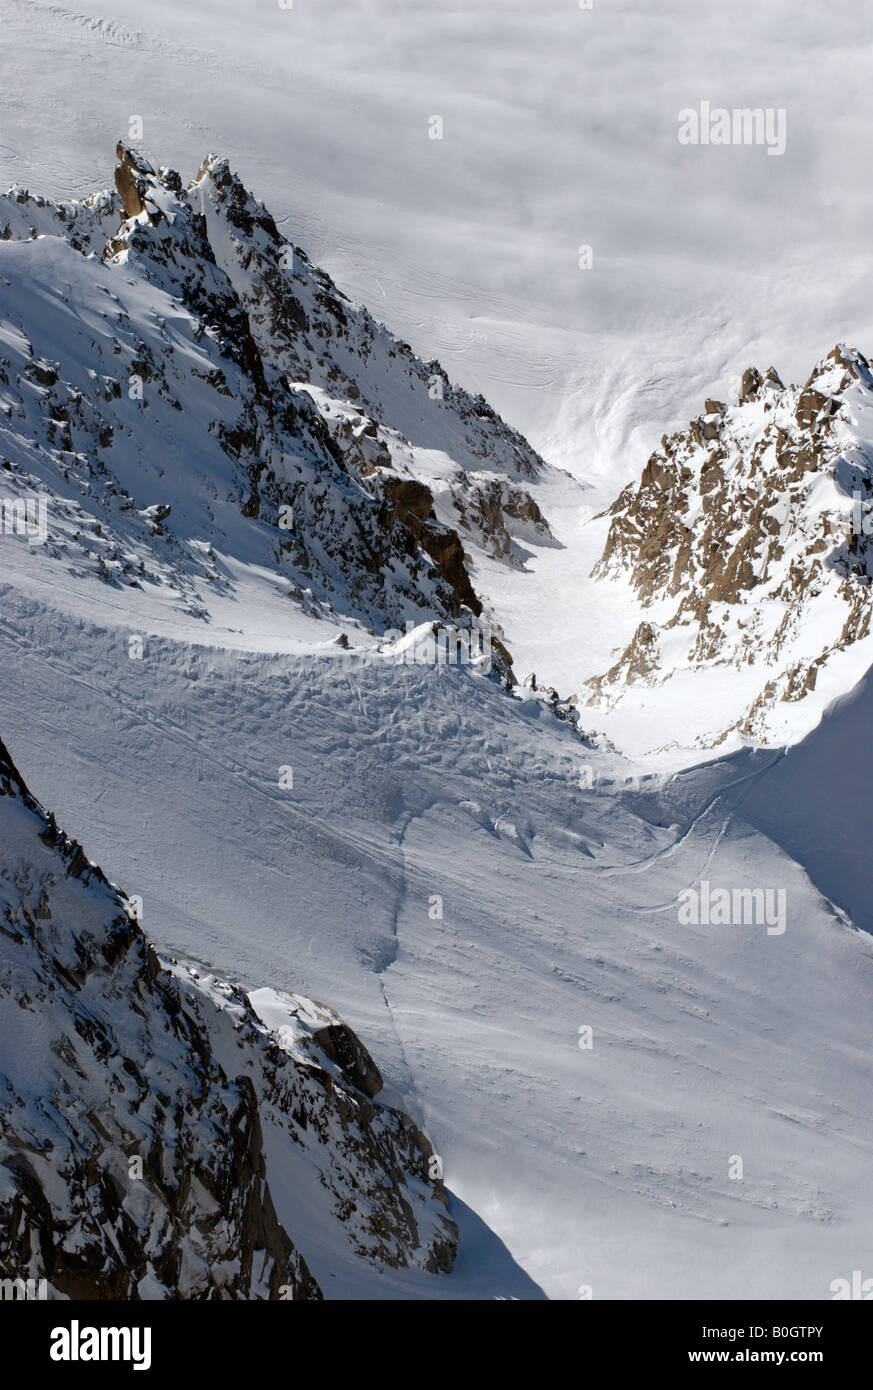 Rond Glacier exit couloir seen from above, Chamonix, France Stock Photo -  Alamy